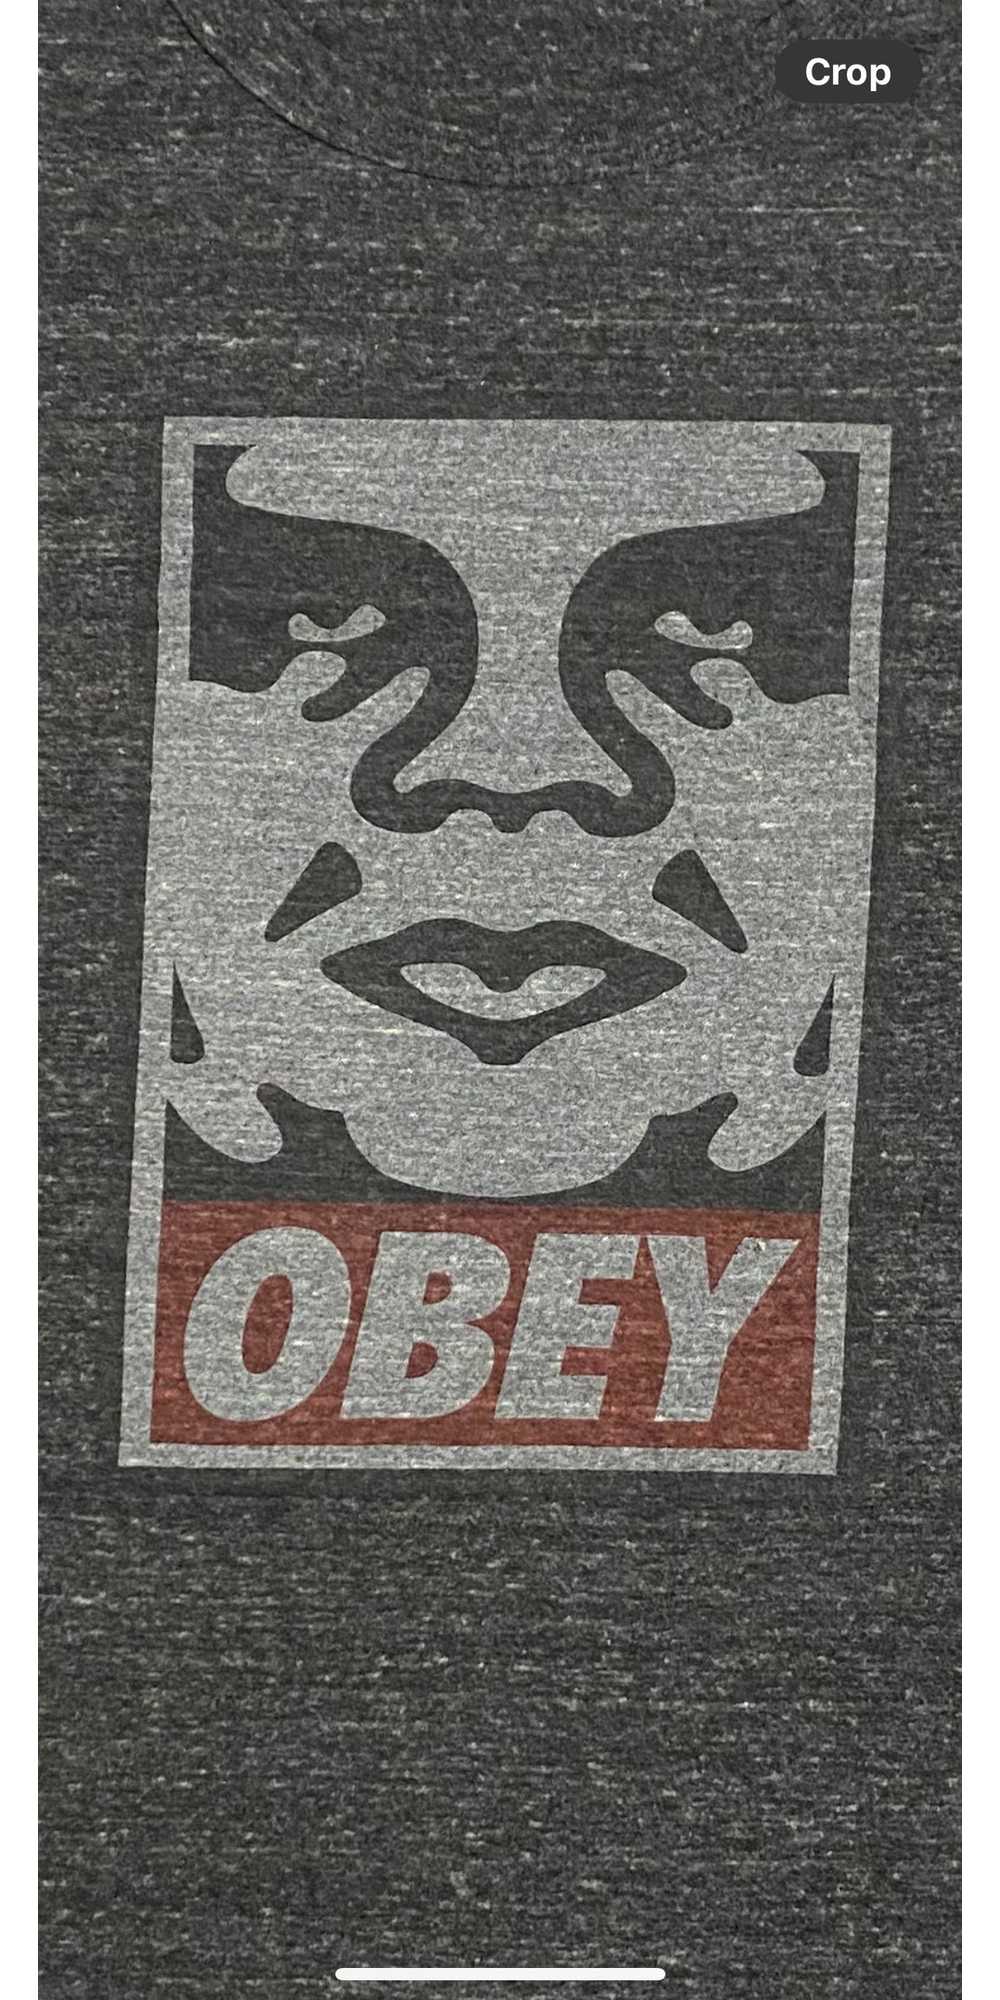 Obey OBEY Andre the giant Shepard Fairey t-shirt - image 1